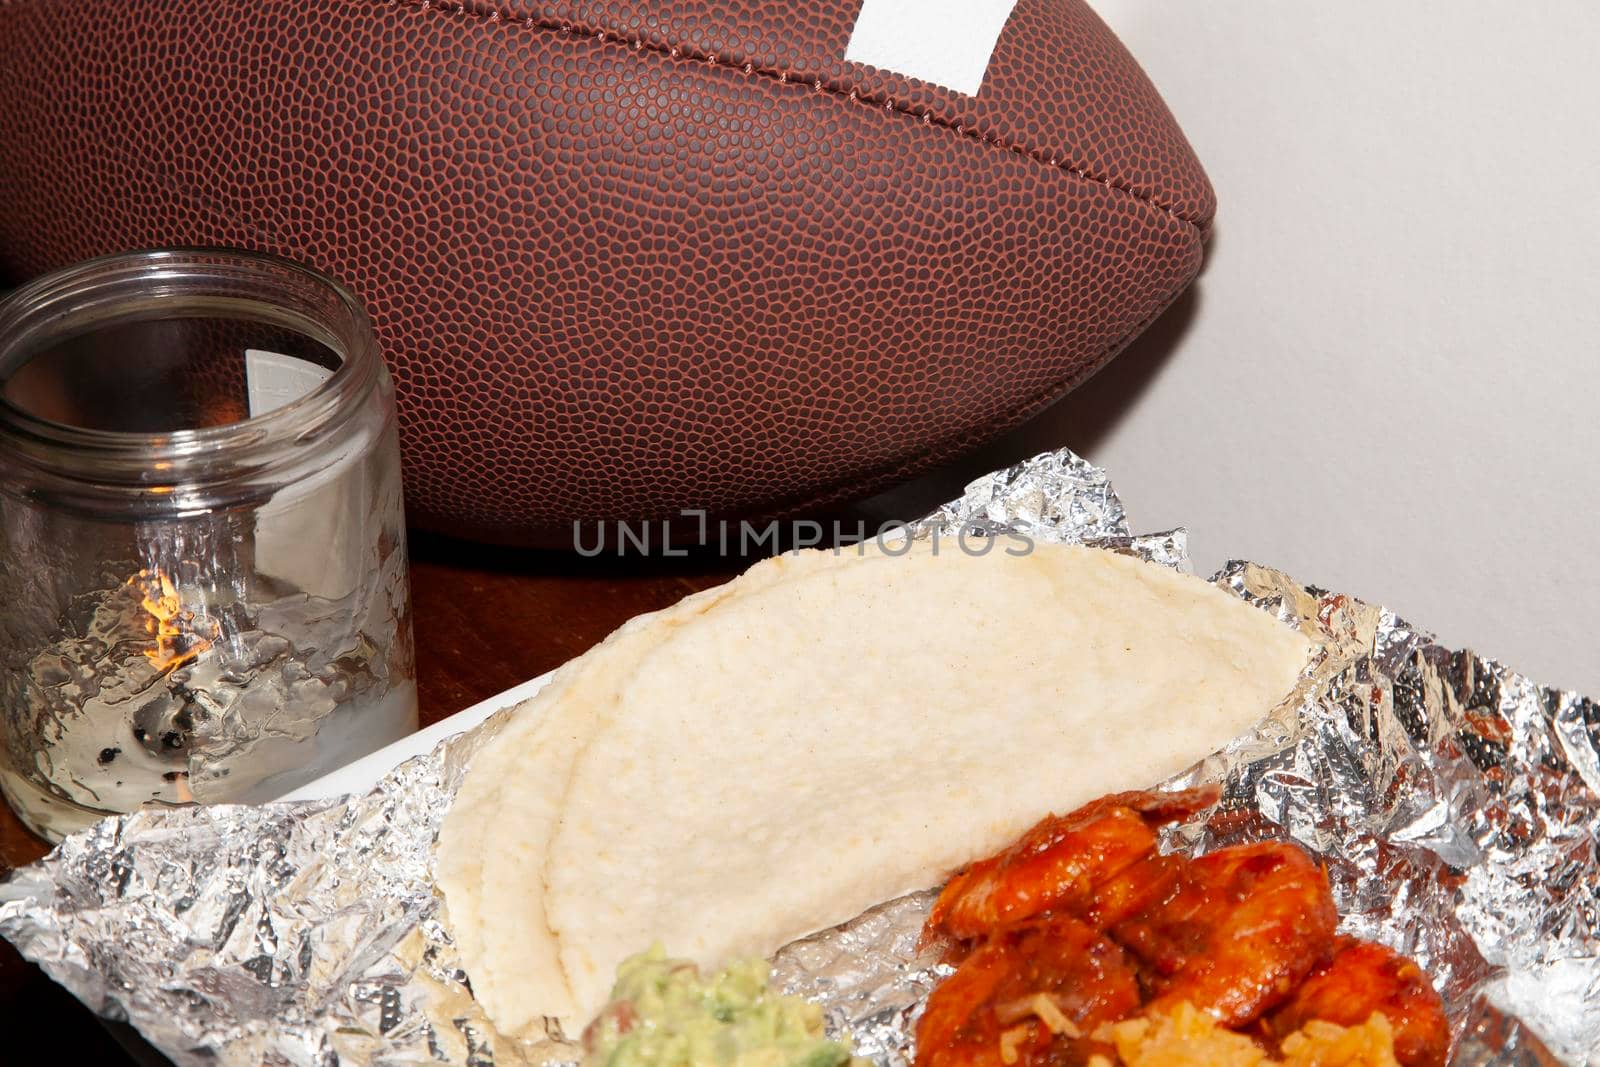 Spicy hot shrimp on foil next to folded corn tortillas wih a candle and a football in the background